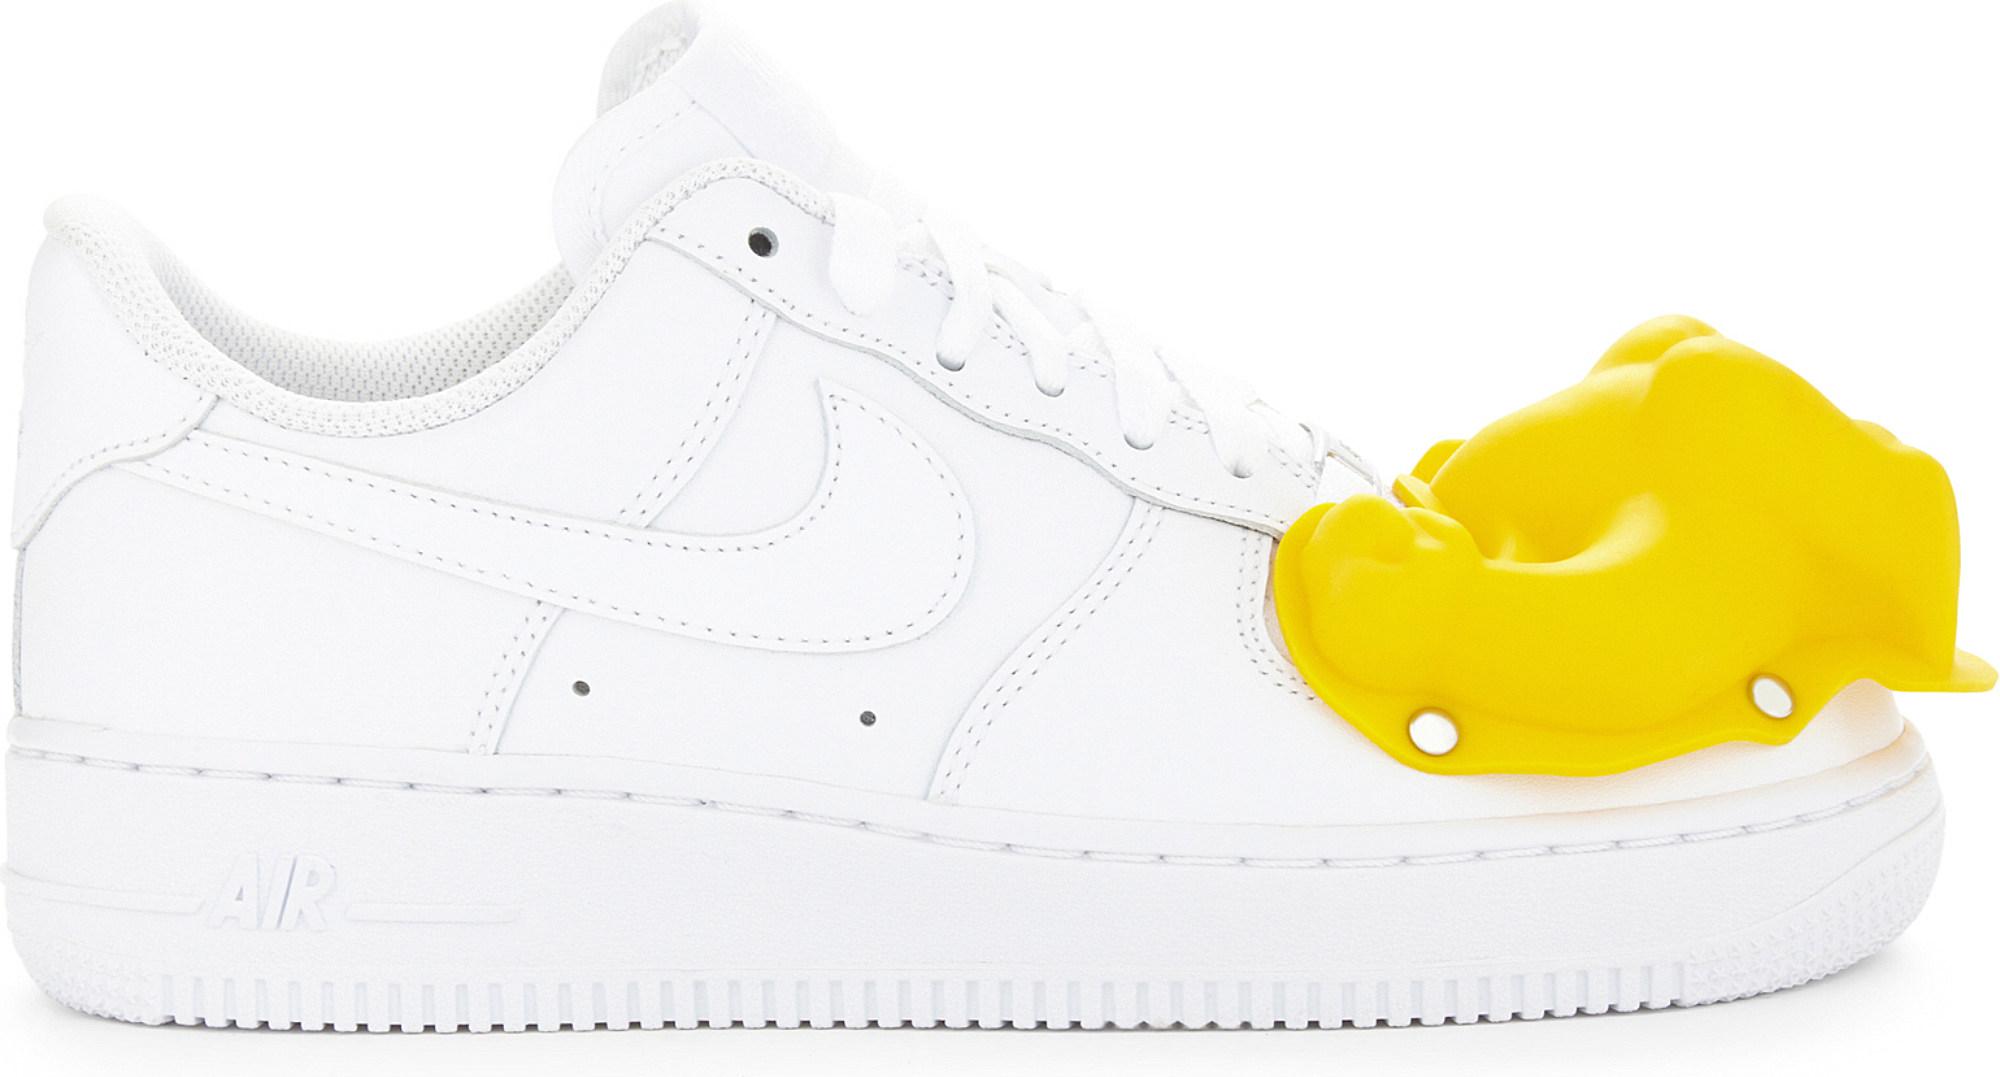 Comme des Garçons Dinosaur Air Force 1 Leather Trainers in White | Lyst